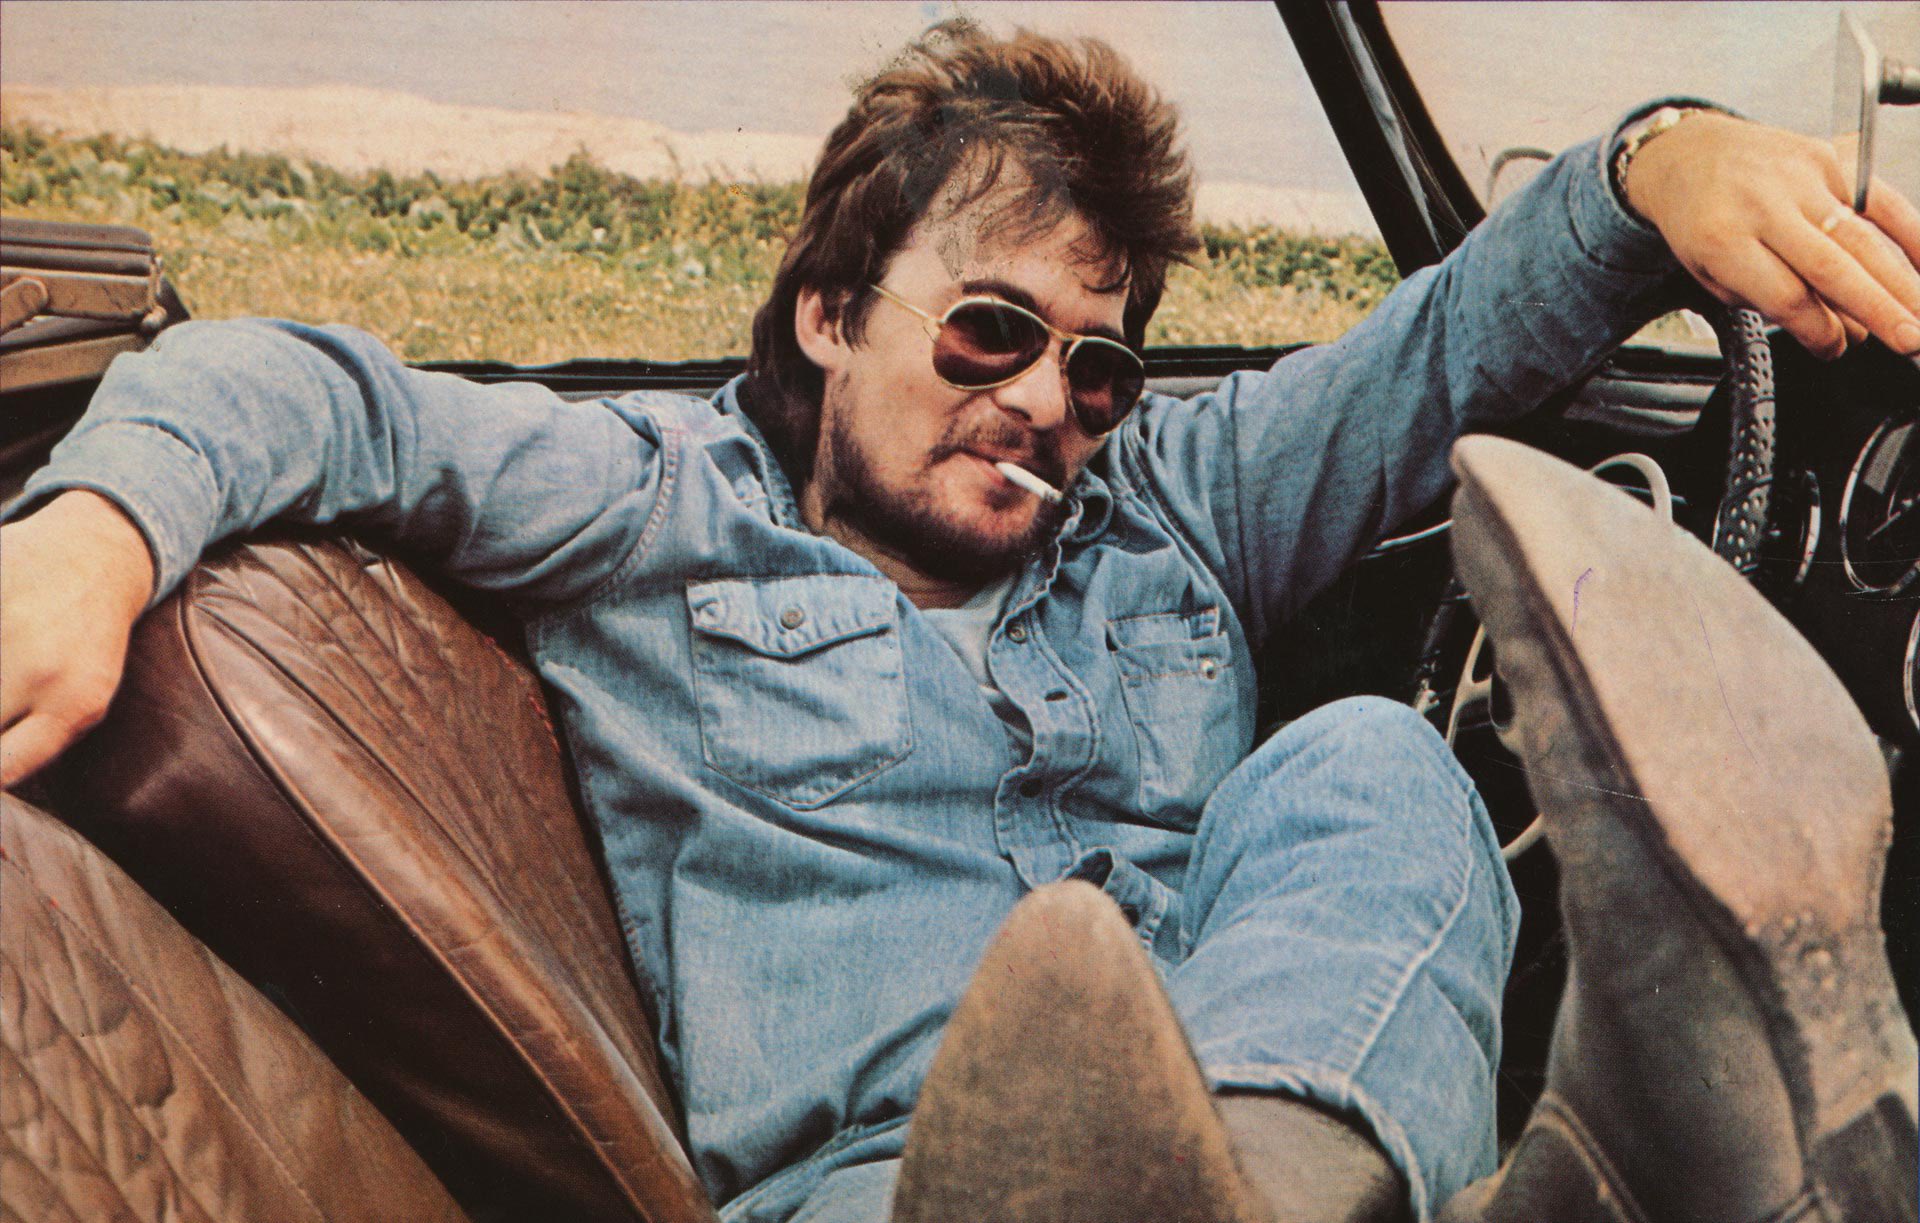 And a very Happy Birthday to the late, great John Prine. Born on this day in 1946. 